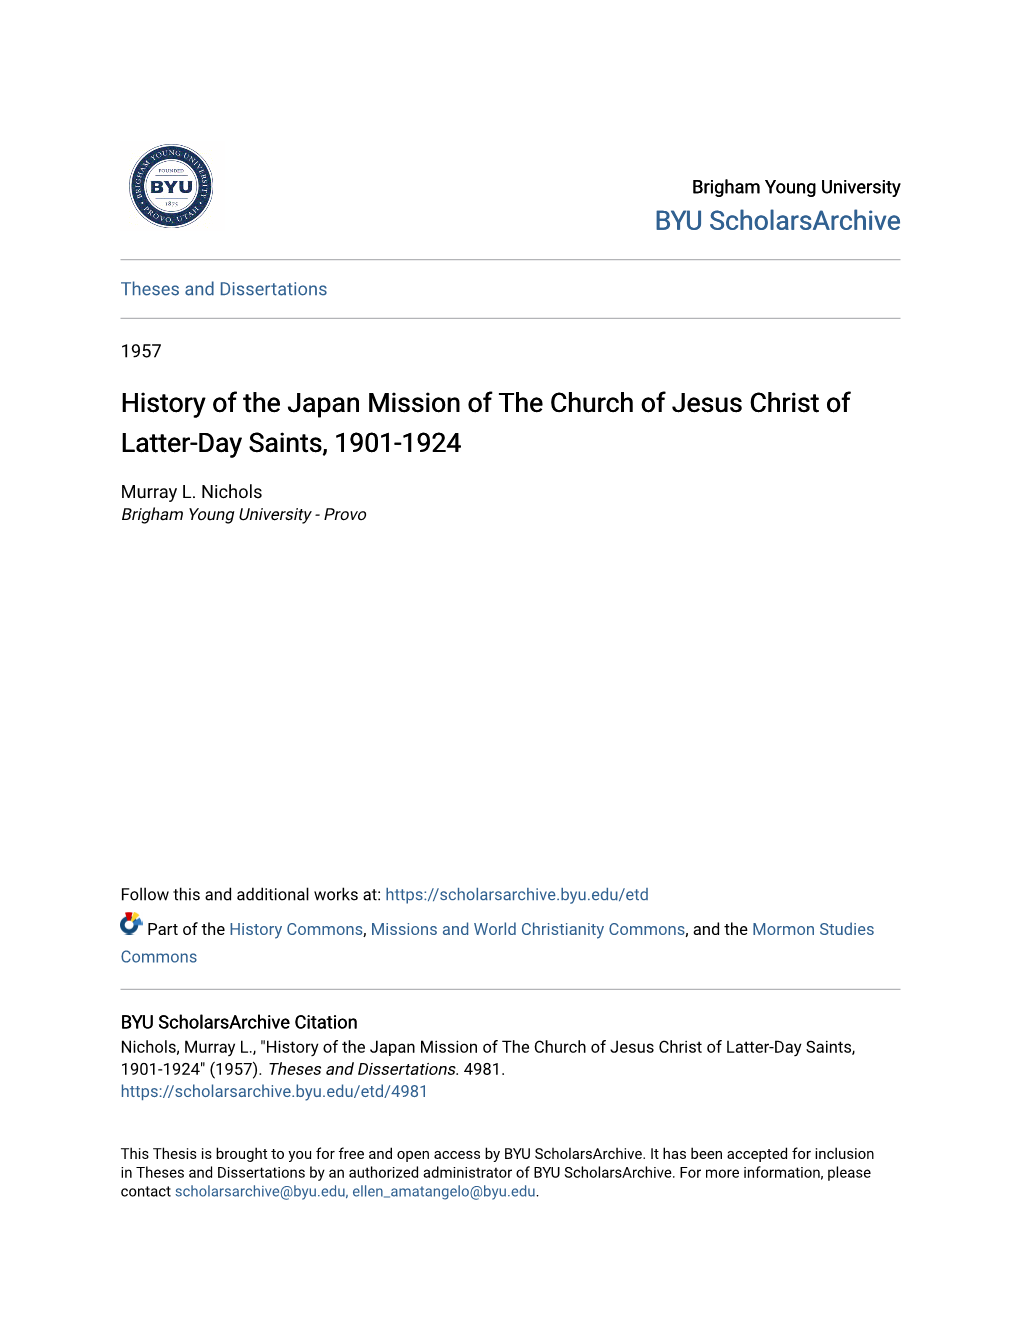 History of the Japan Mission of the Church of Jesus Christ of Latter-Day Saints, 1901-1924